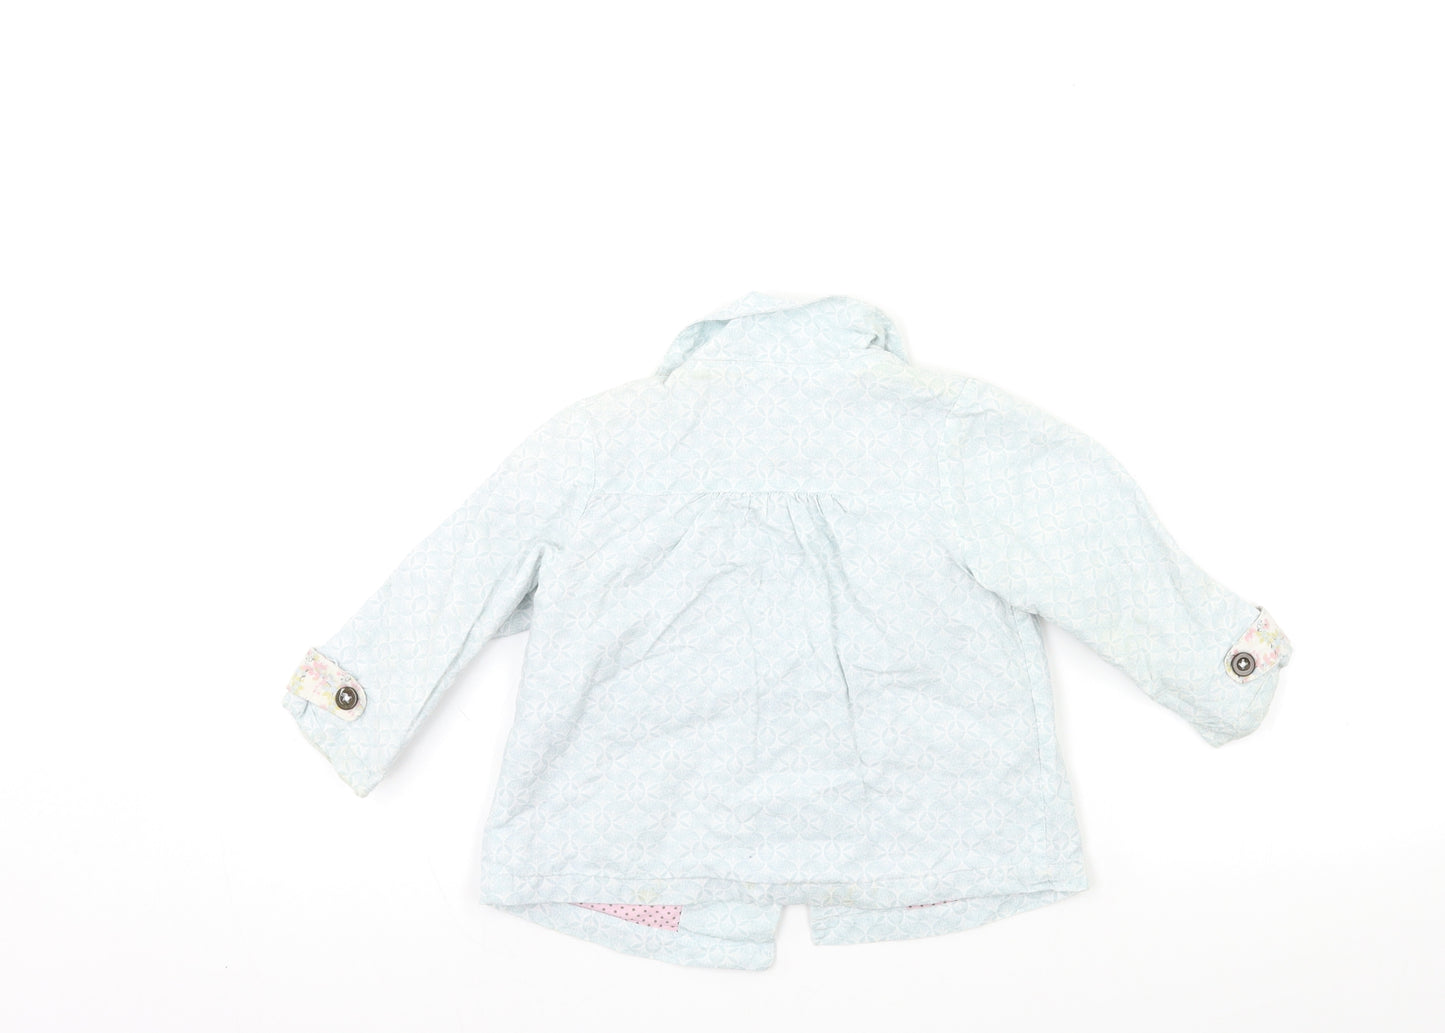 Henry Girls Blue Floral  Jacket  Size 3 Years